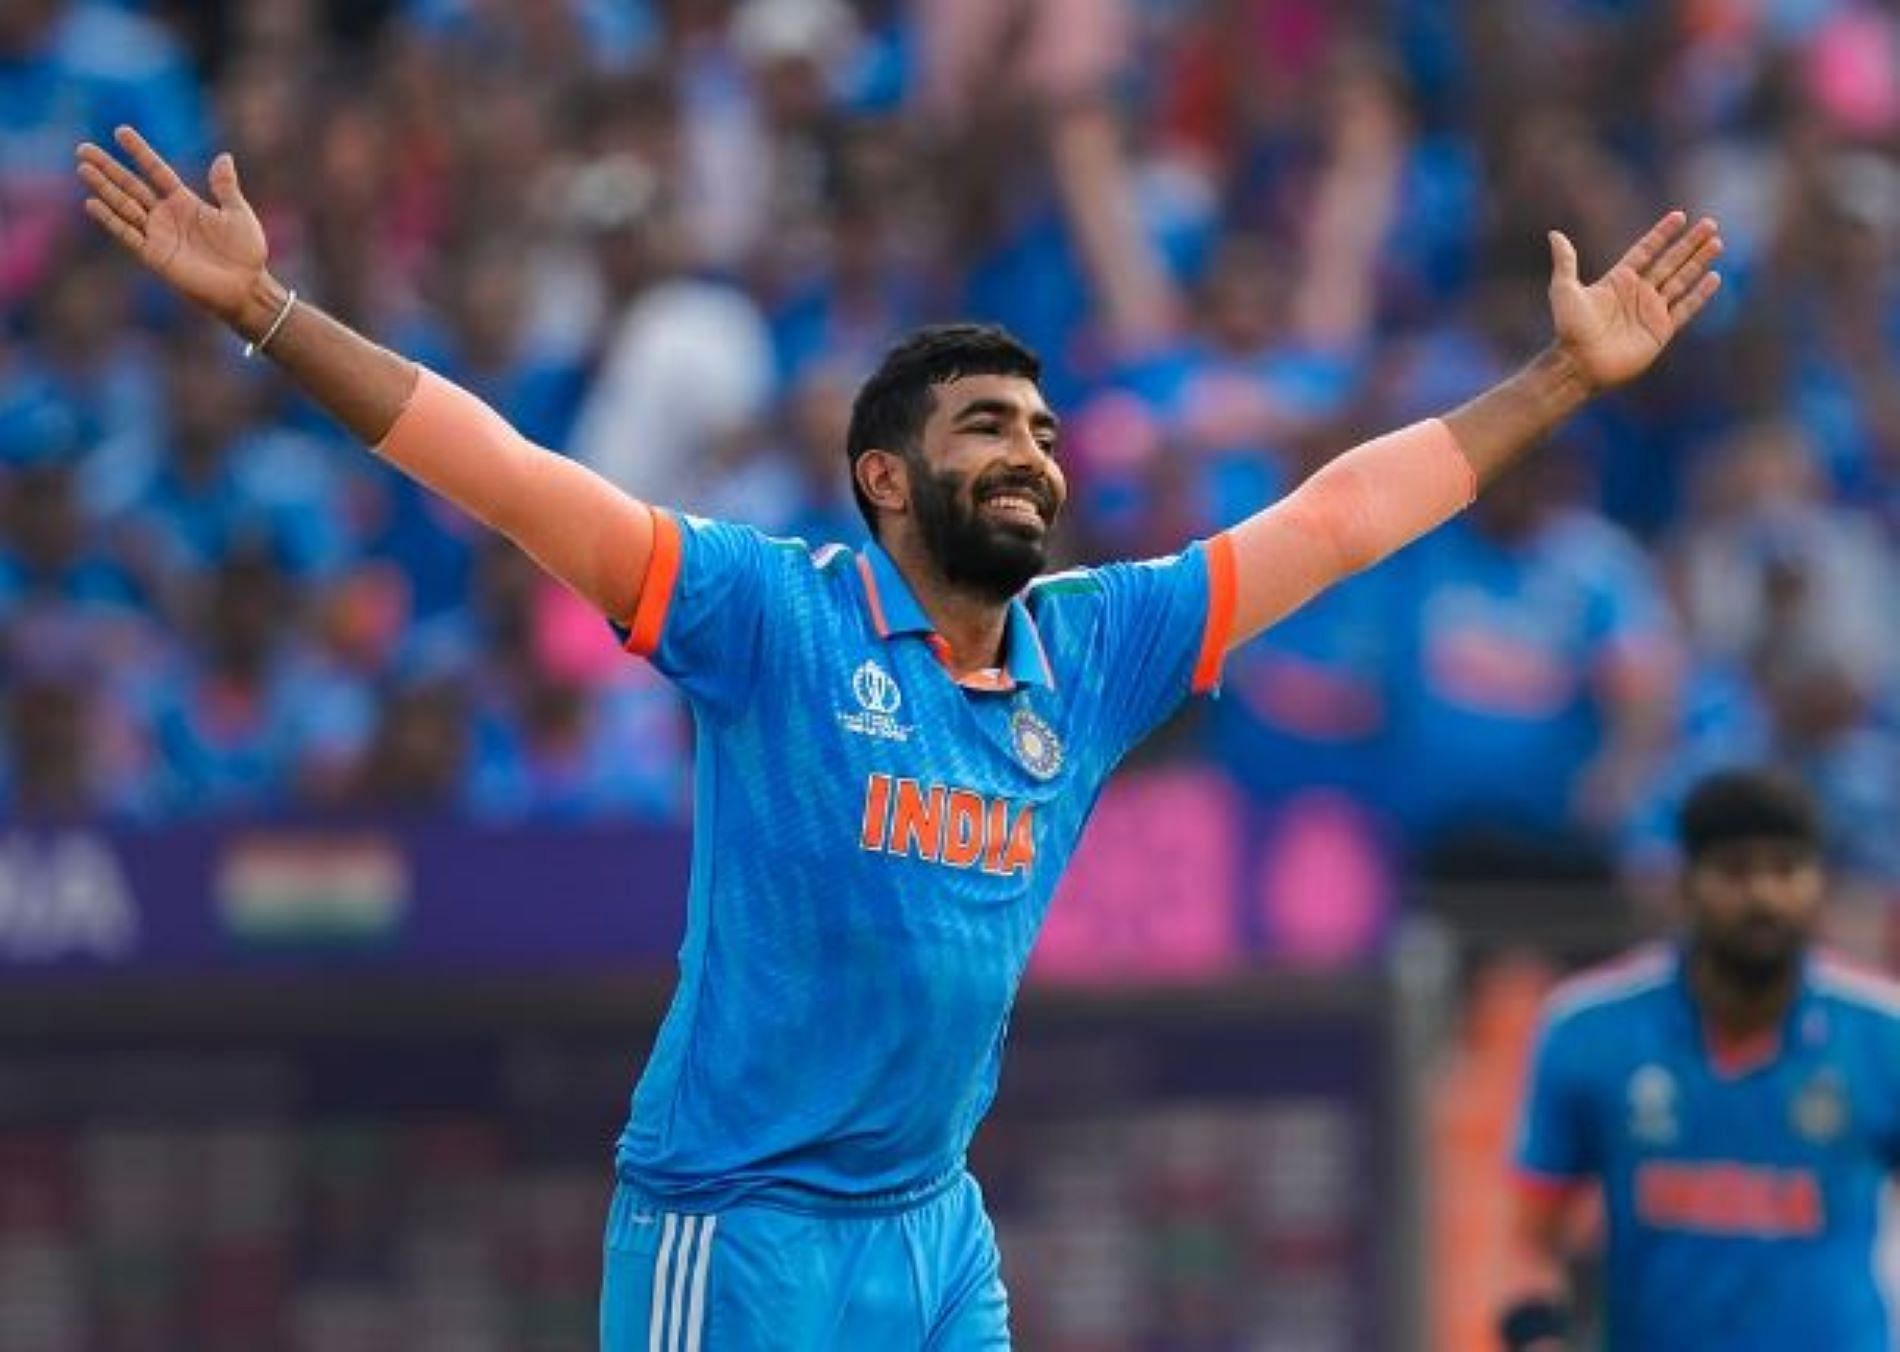 Jasprit Burmah has led the Indian bowling attack throughout the tournament.